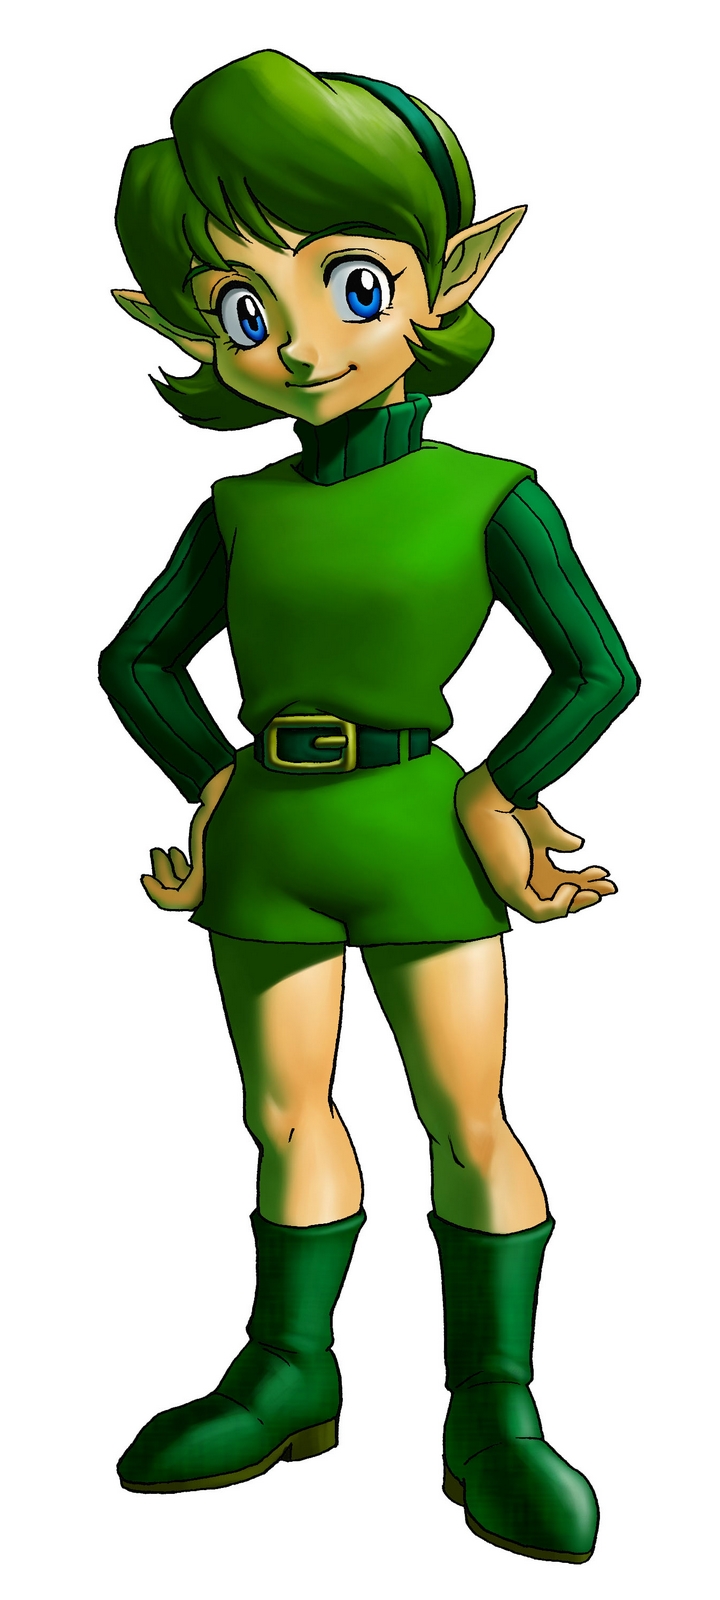 Saria (Artwork - Personnages - Ocarina of Time)